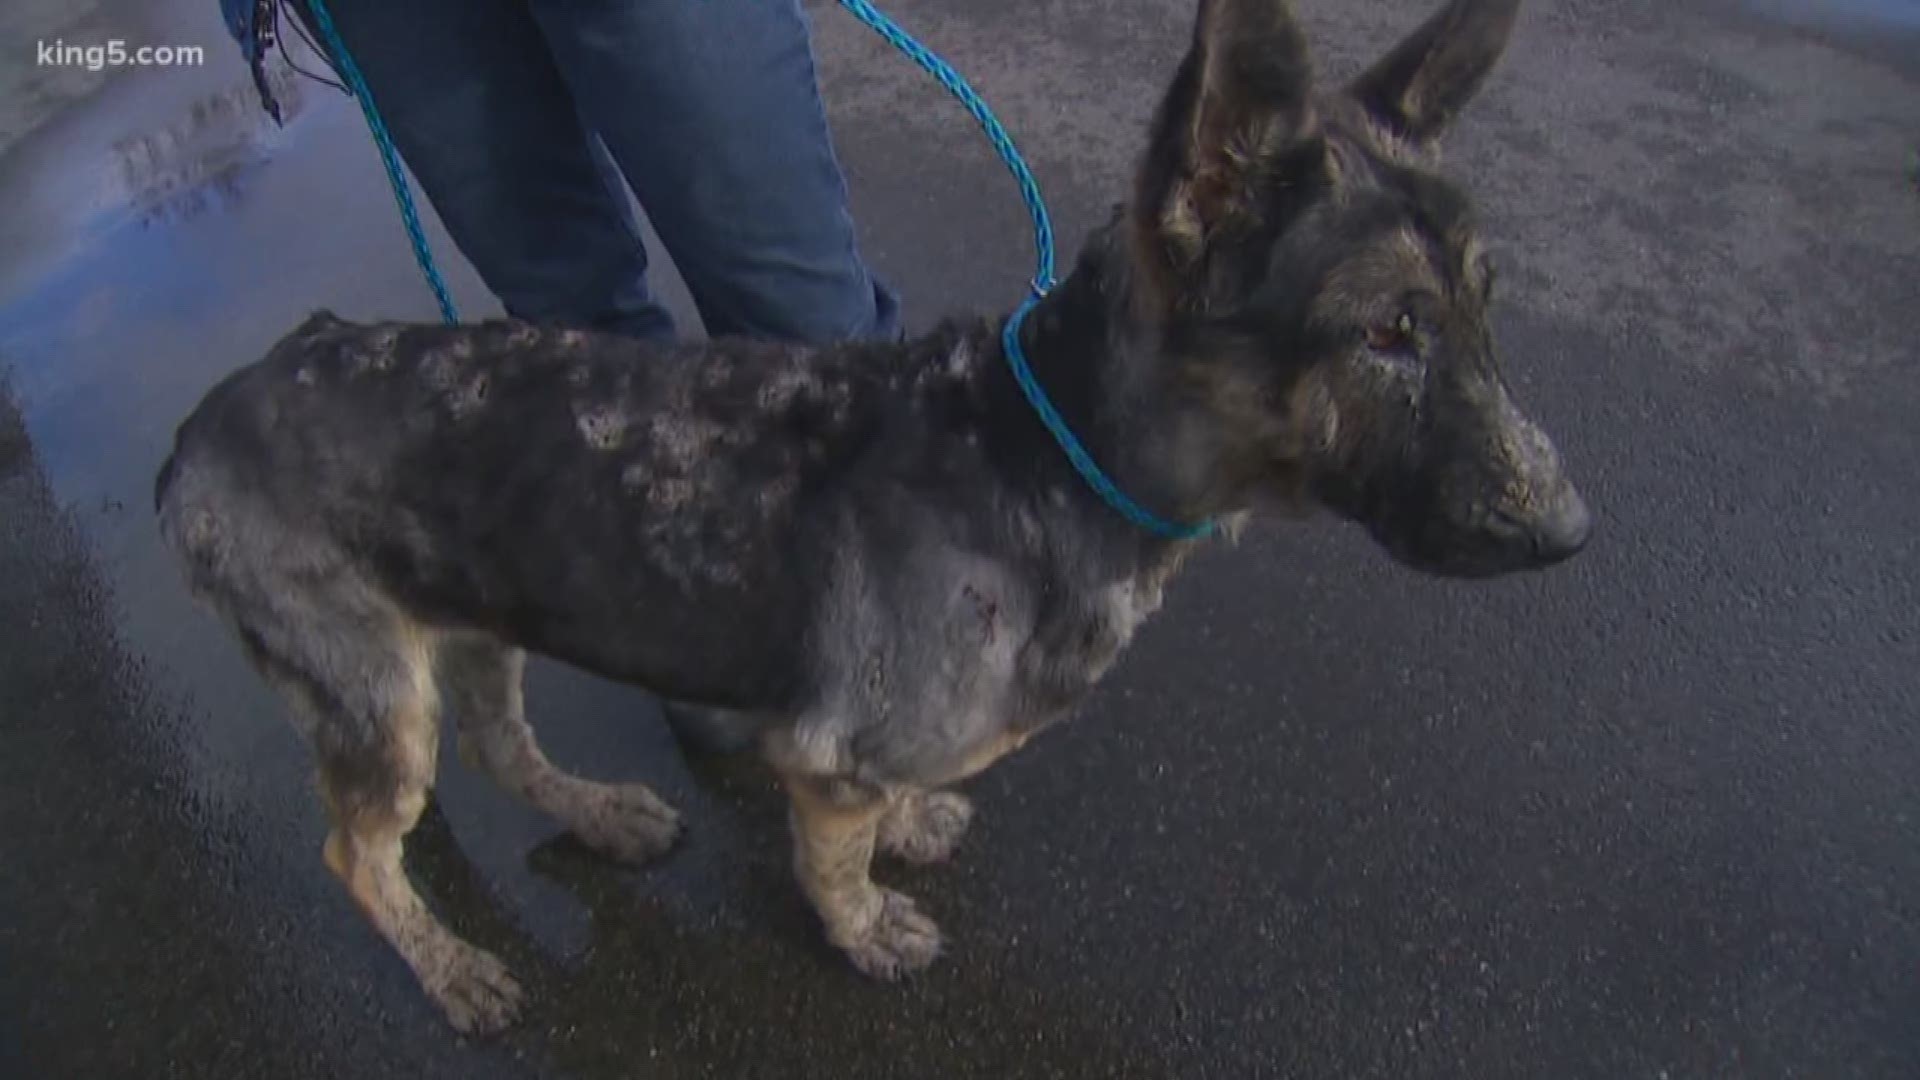 A Snohomish County Sheriff's Deputy discovered a dog in the middle of a snowstorm. Turns out the dog  had been missing since September.